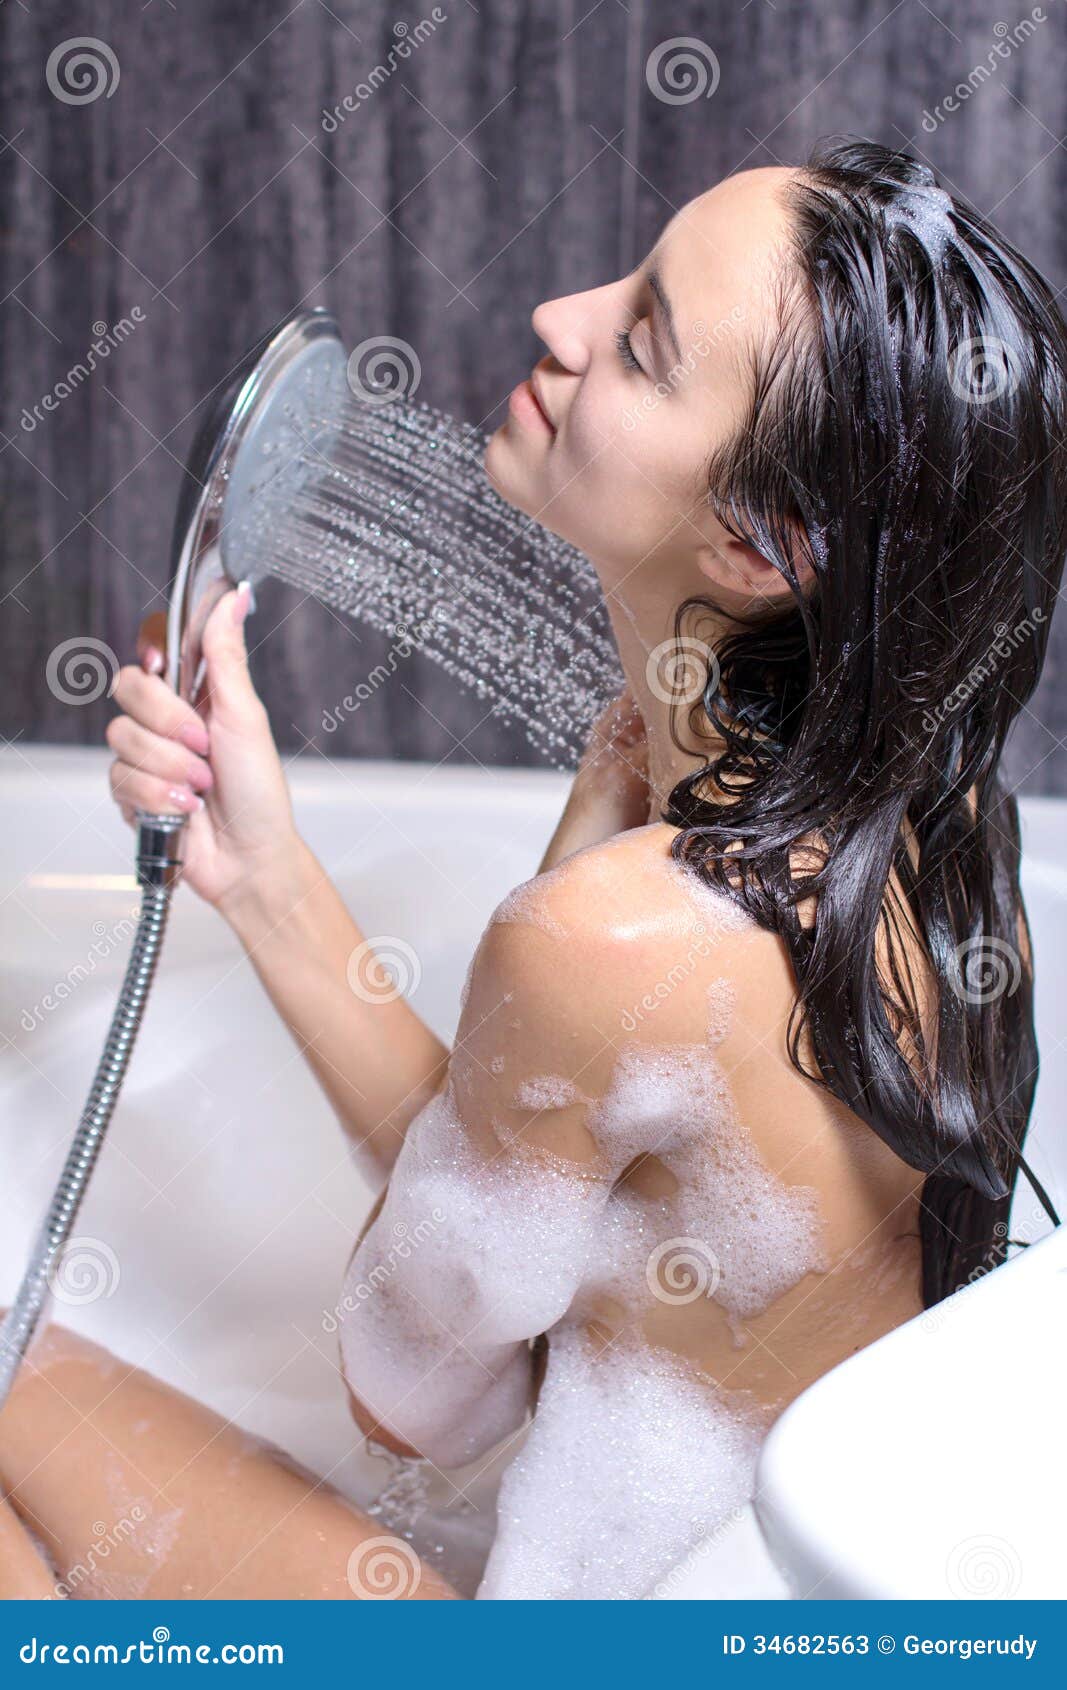 Woman Takes Bath stock image. Image of pampering, douche - 34682563